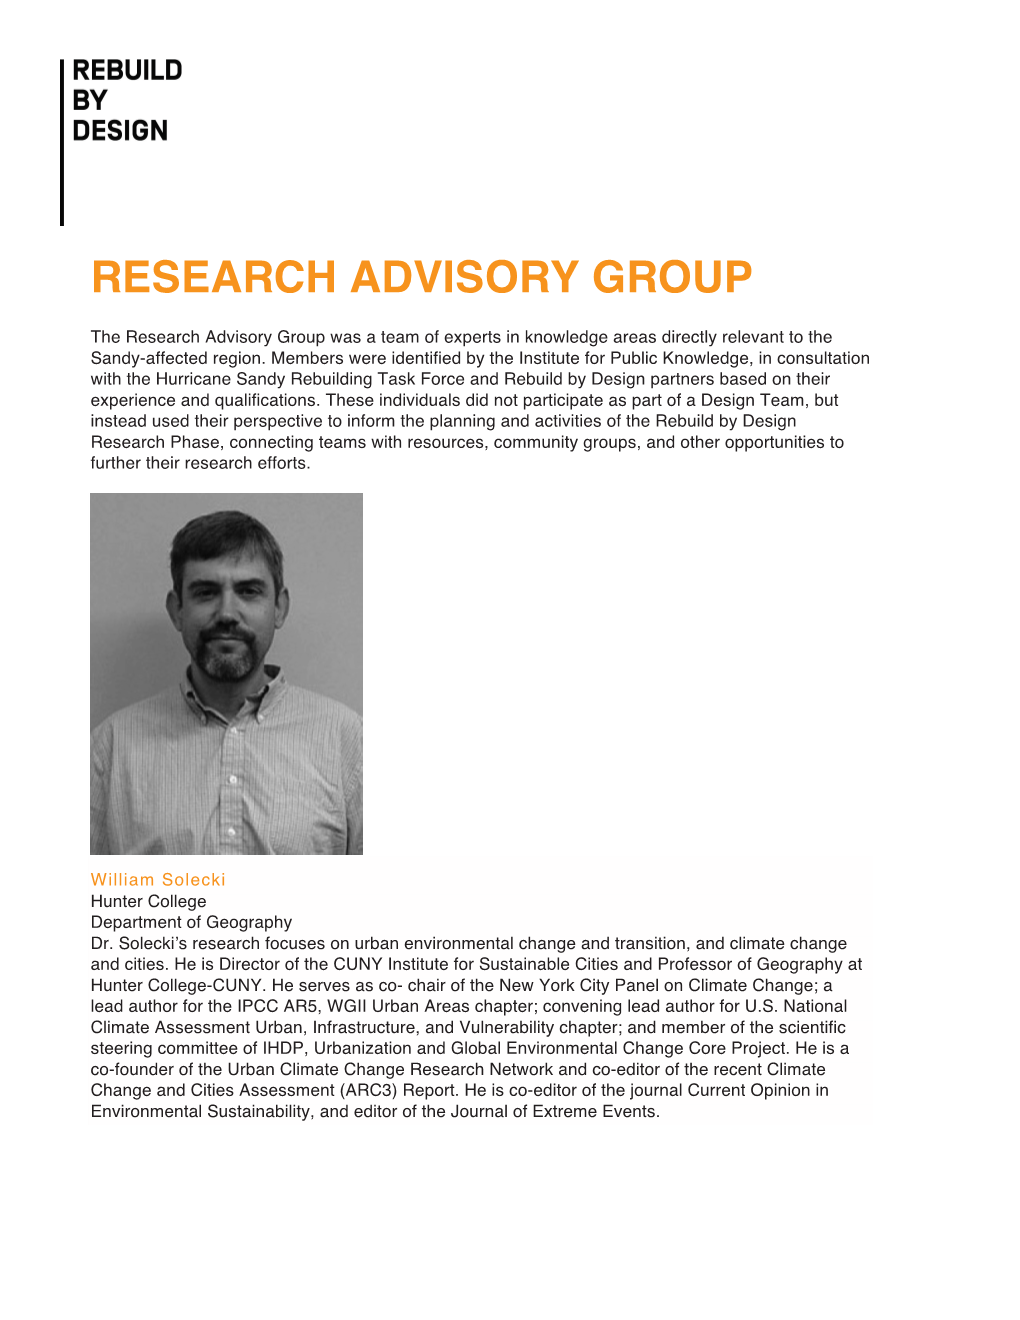 Research Advisory Group